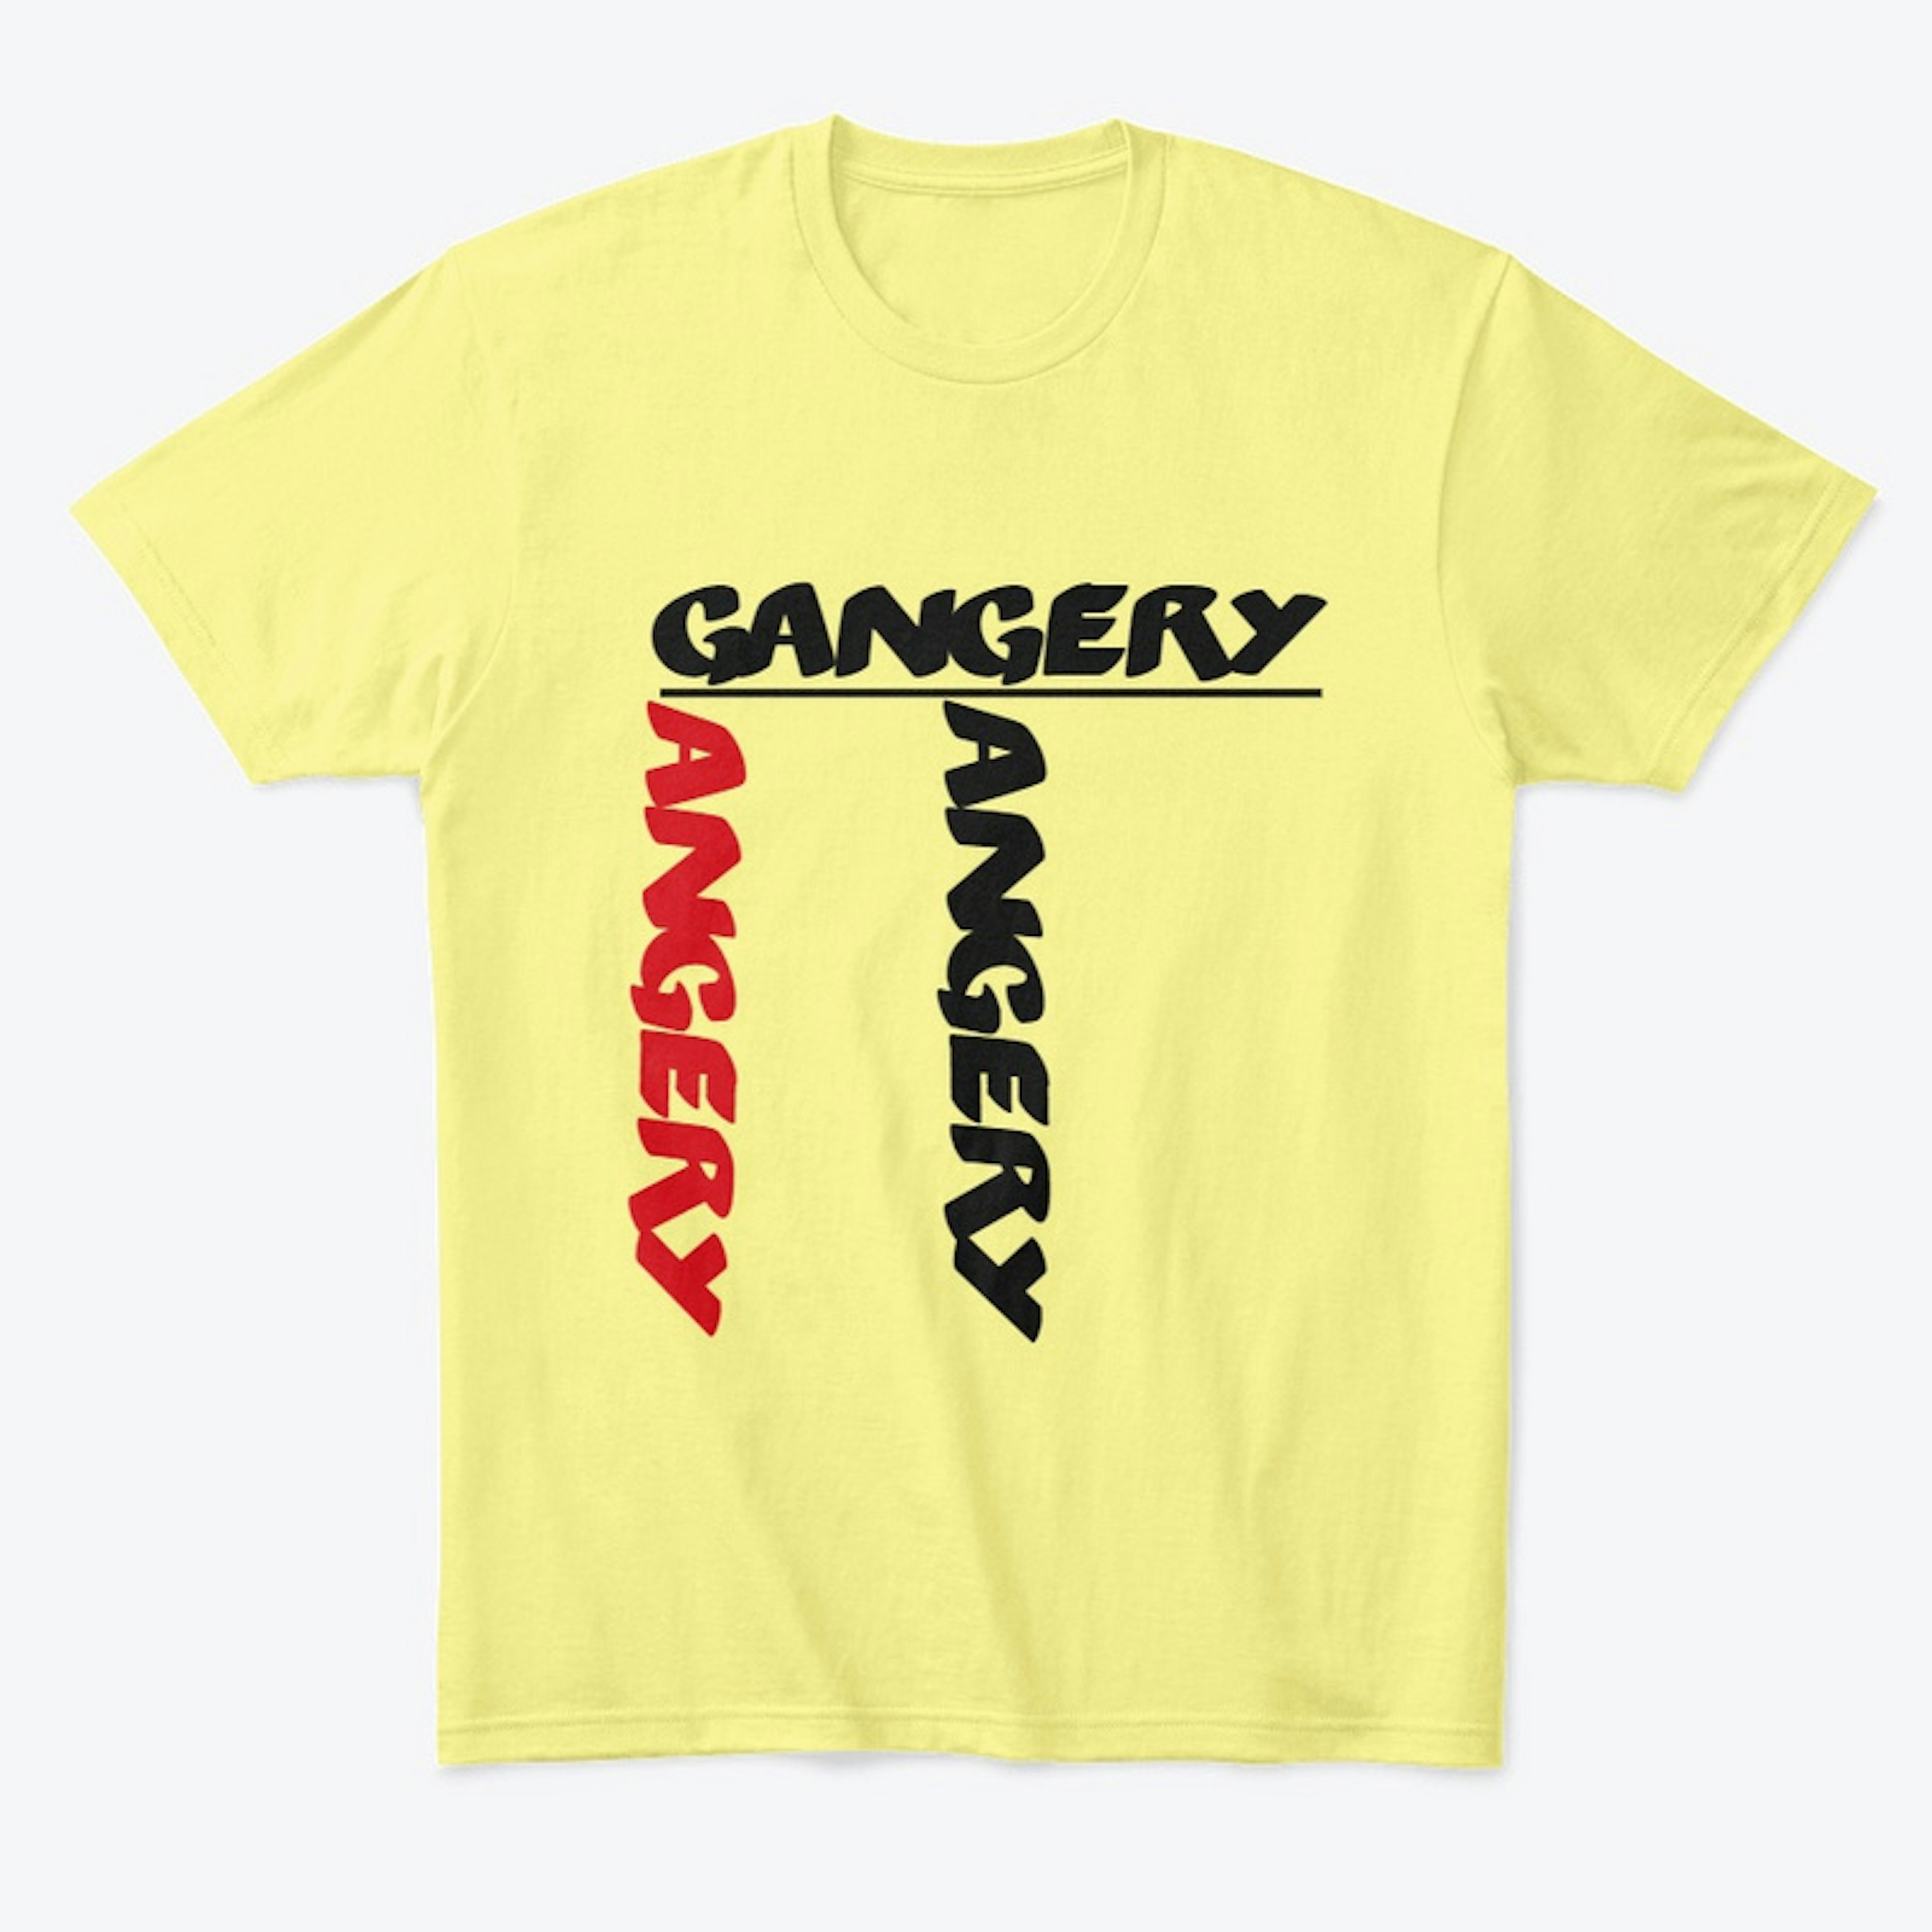 THE GANGERY COLLECTION